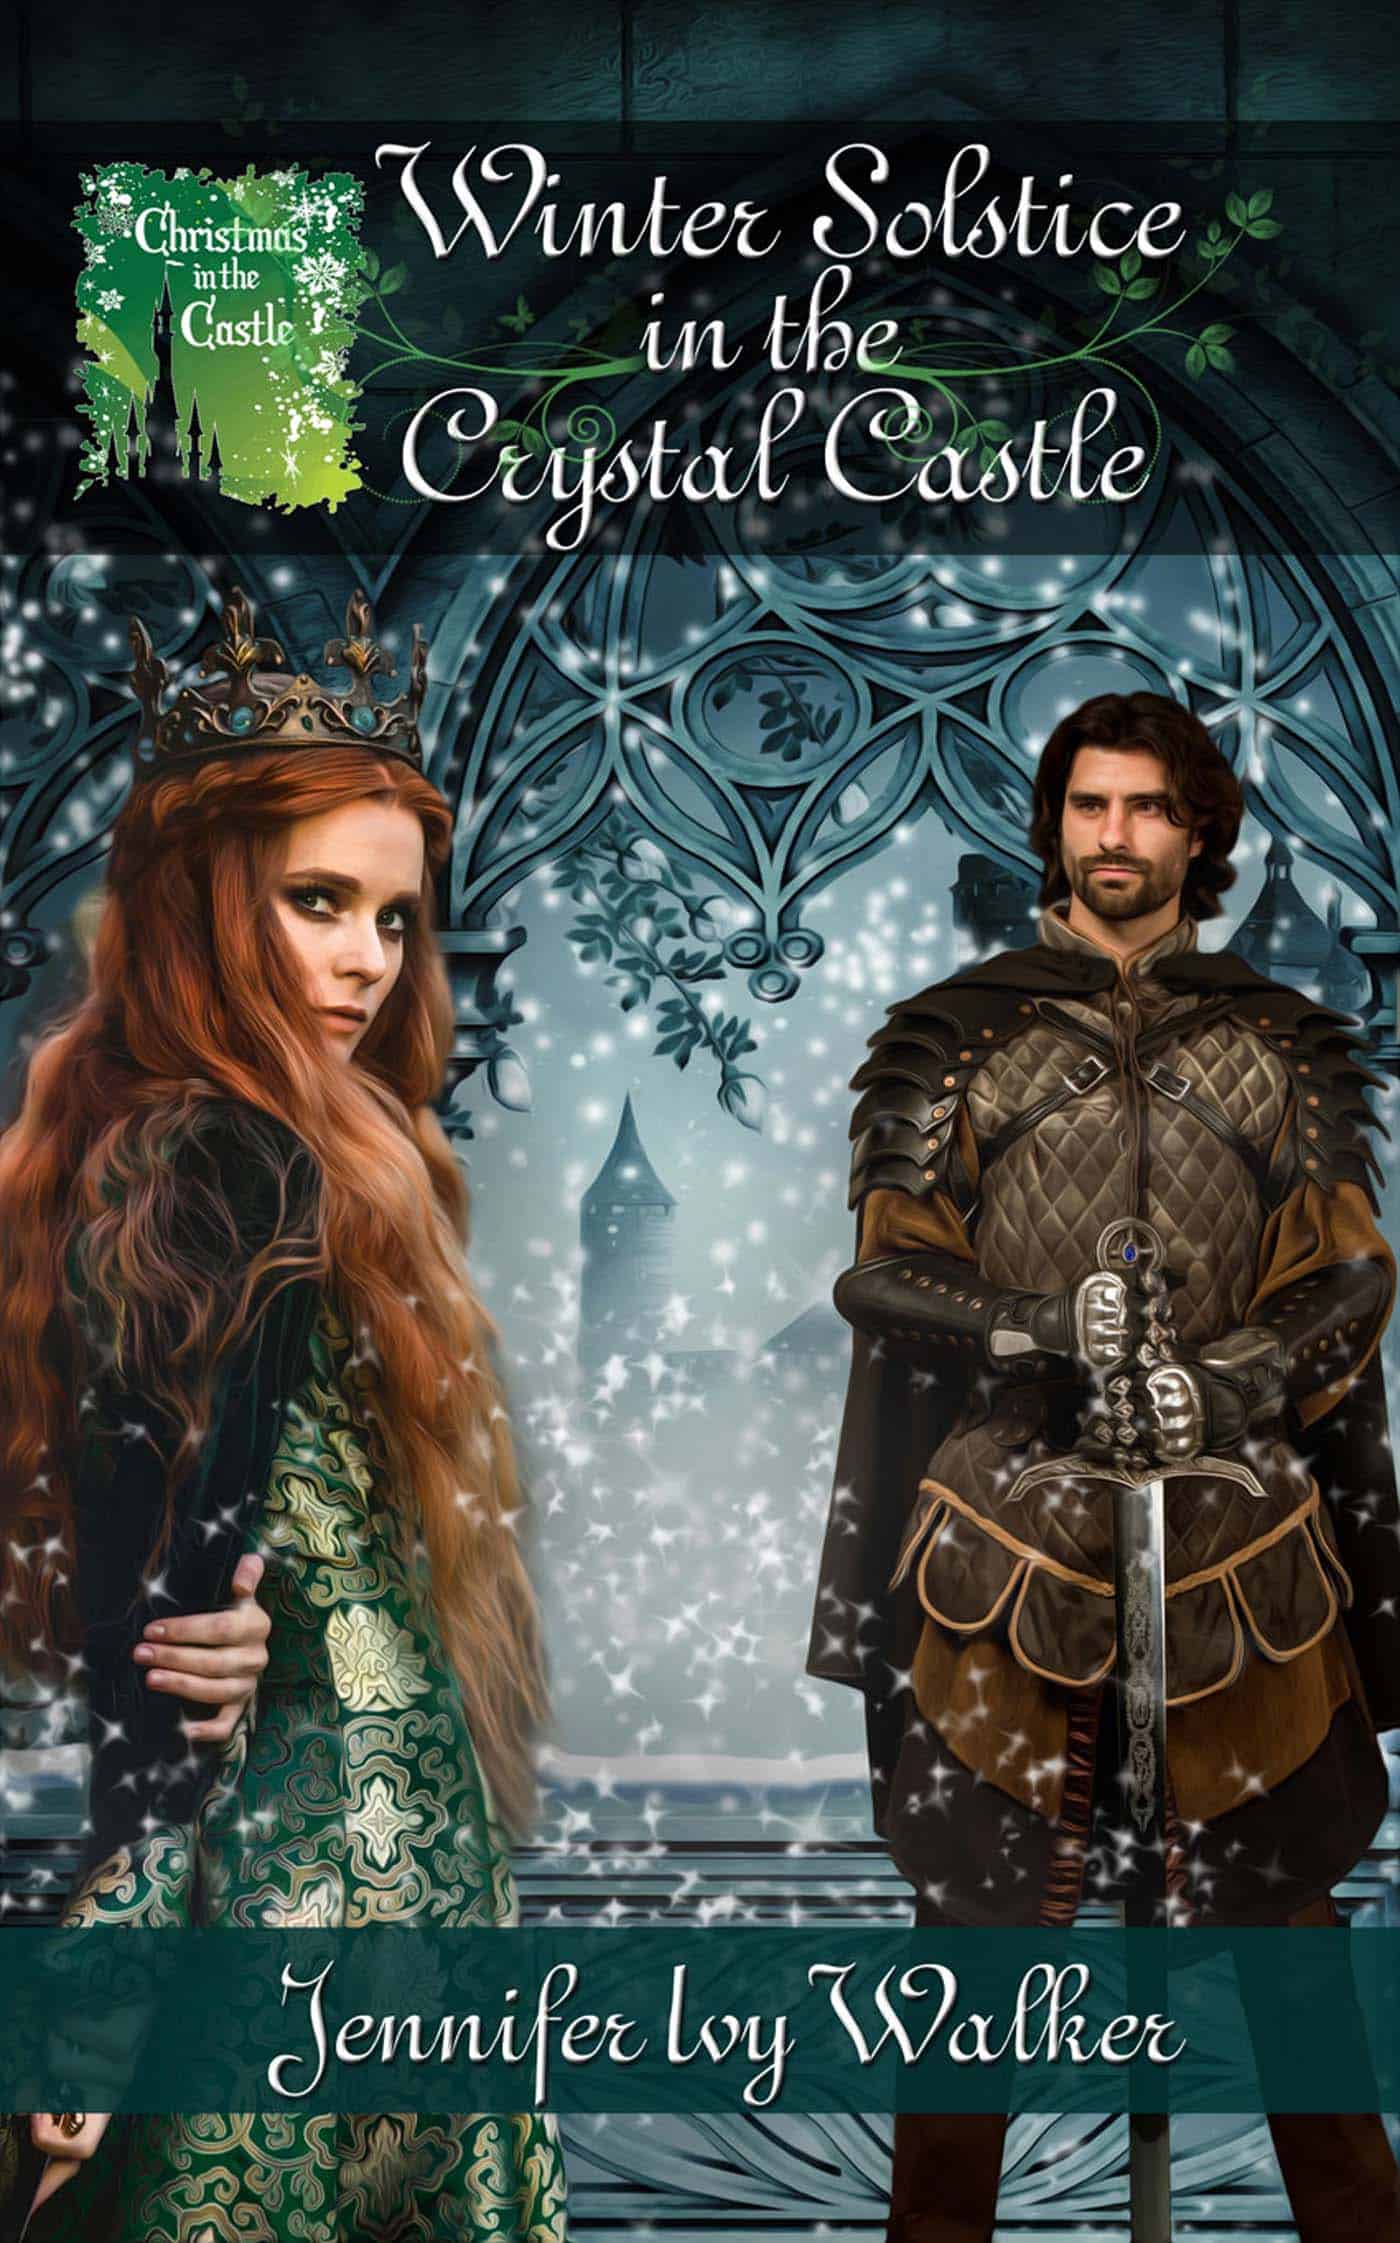 Winter Solstice in the Crystal Castle book cover - medievel romance theme